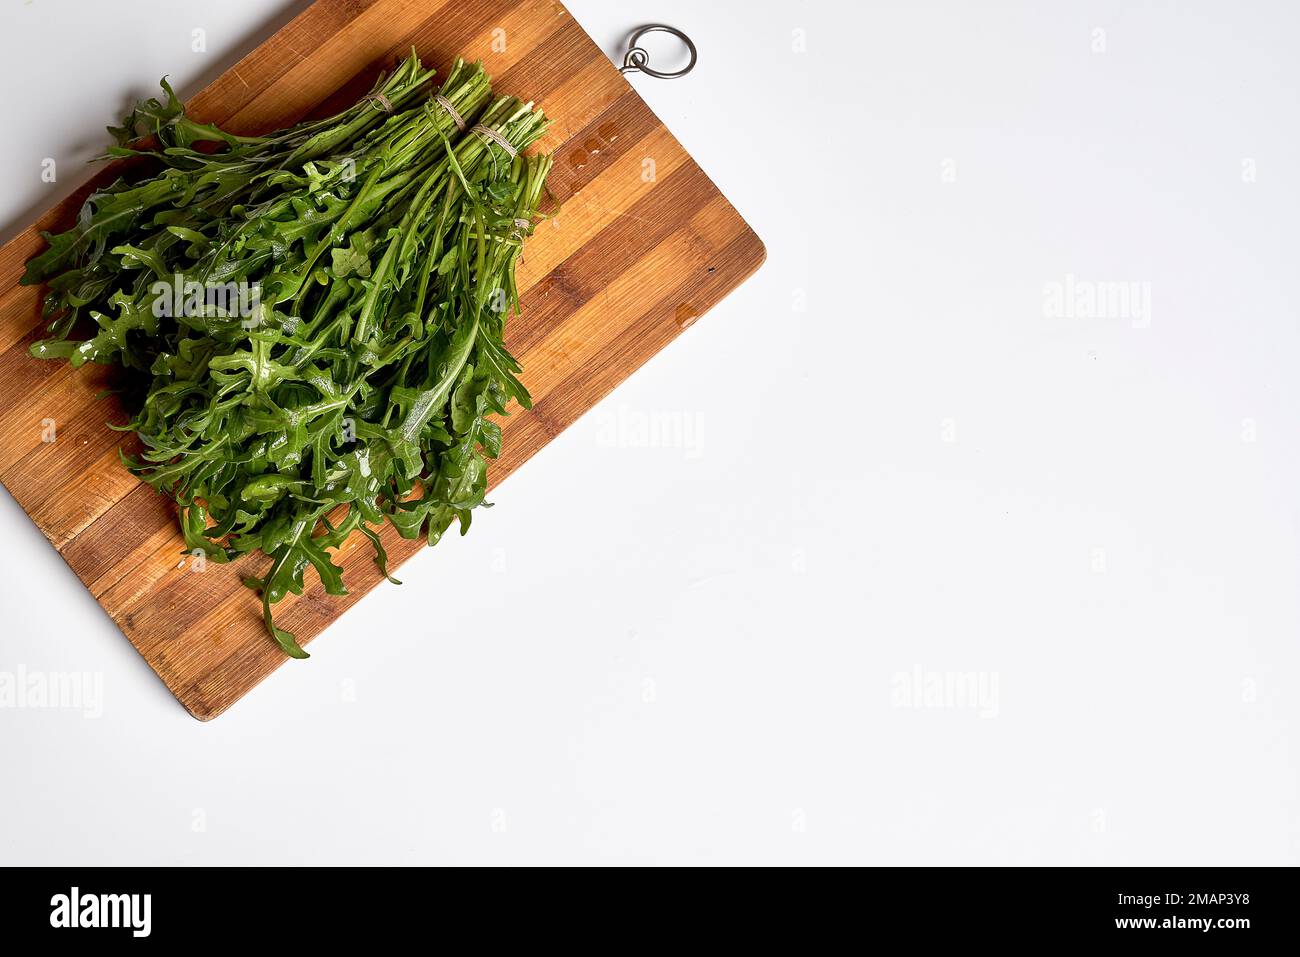 some green vegetables on a wooden cutting board with a knife in the middle and a white background to the right Stock Photo